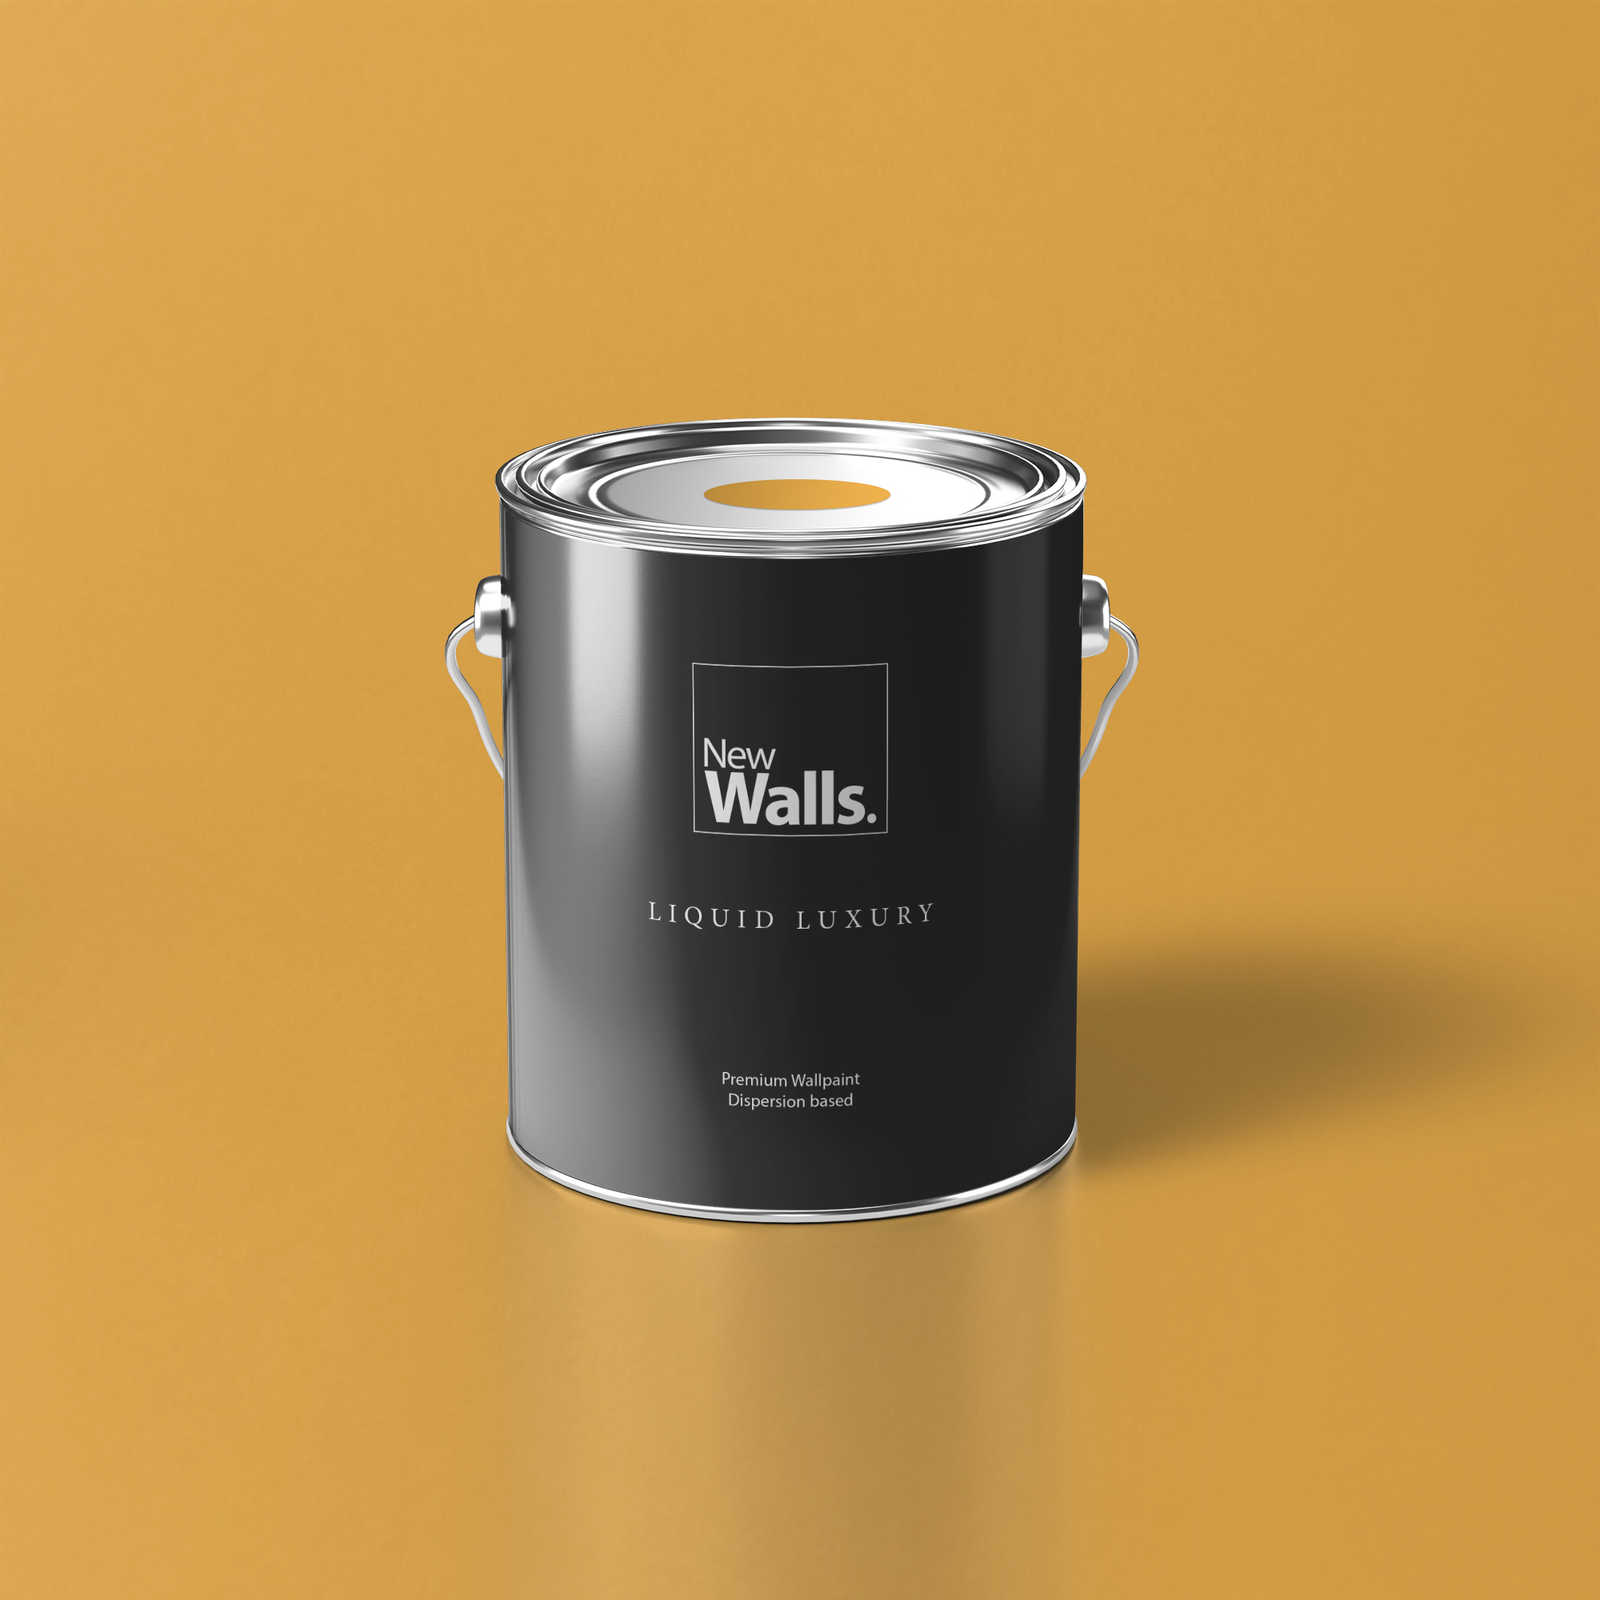 Premium Wall Paint strong saffron yellow »Juicy Yellow« NW806 – 5 litre
